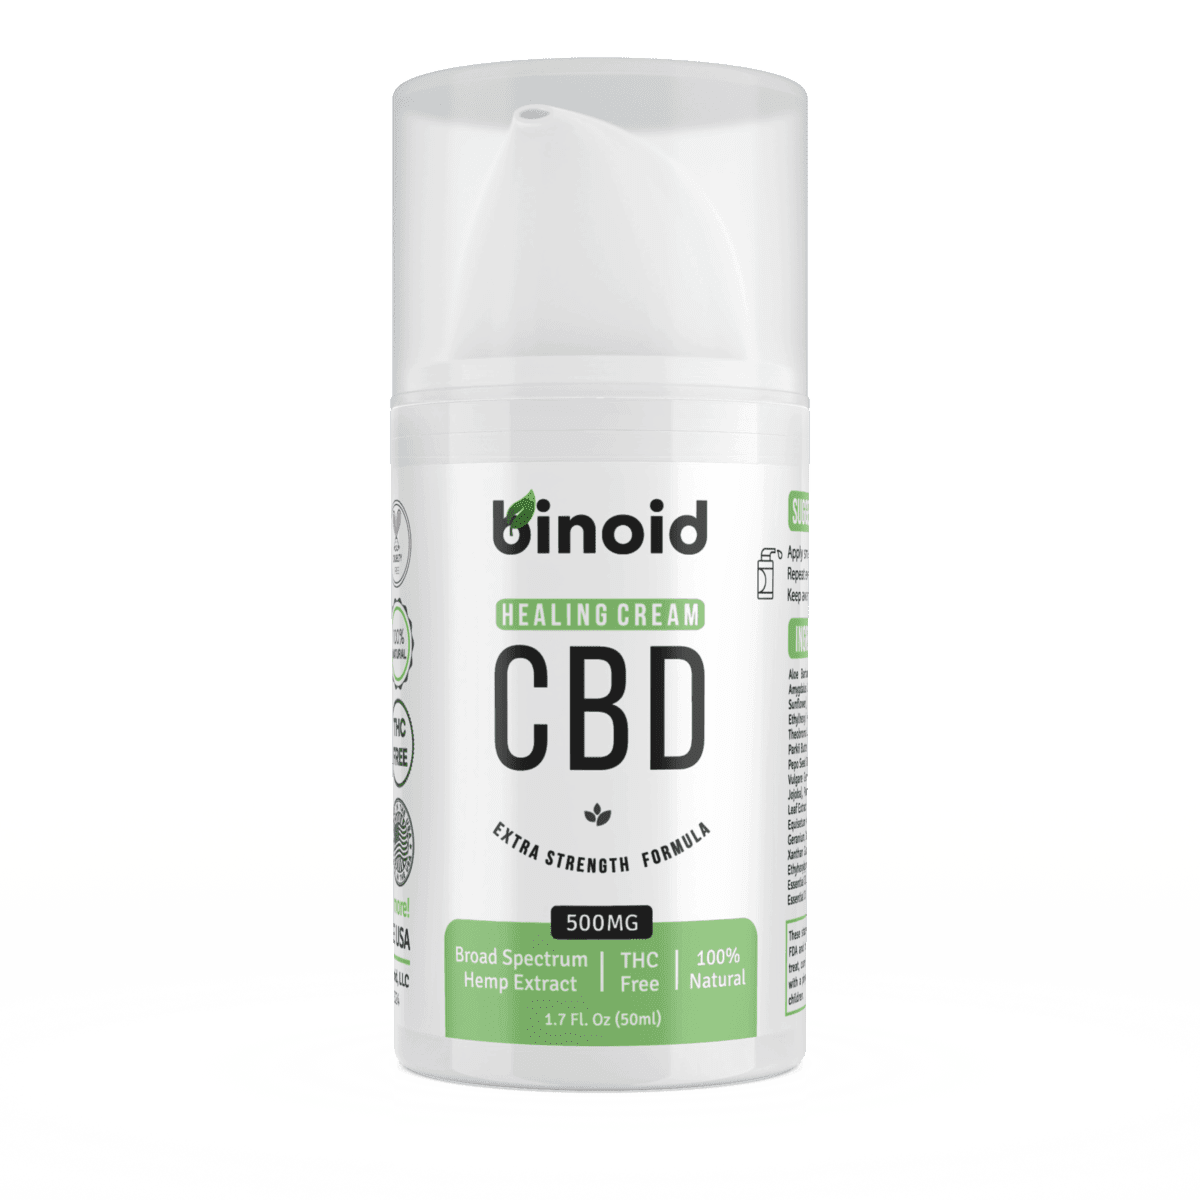 Binoid CBD Creams and Topicals Review